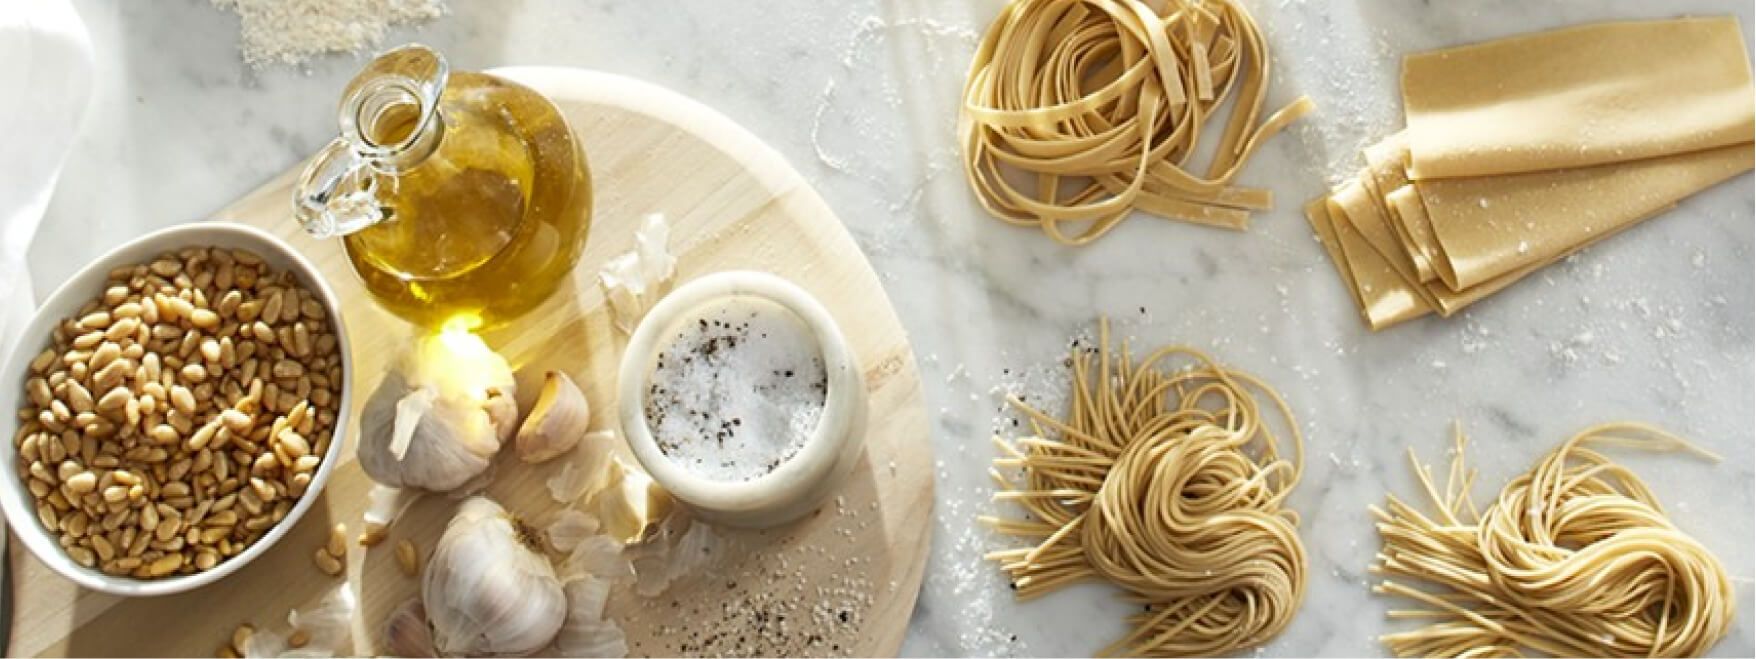 Homemade pasta nests and ingredients on a kitchen counter